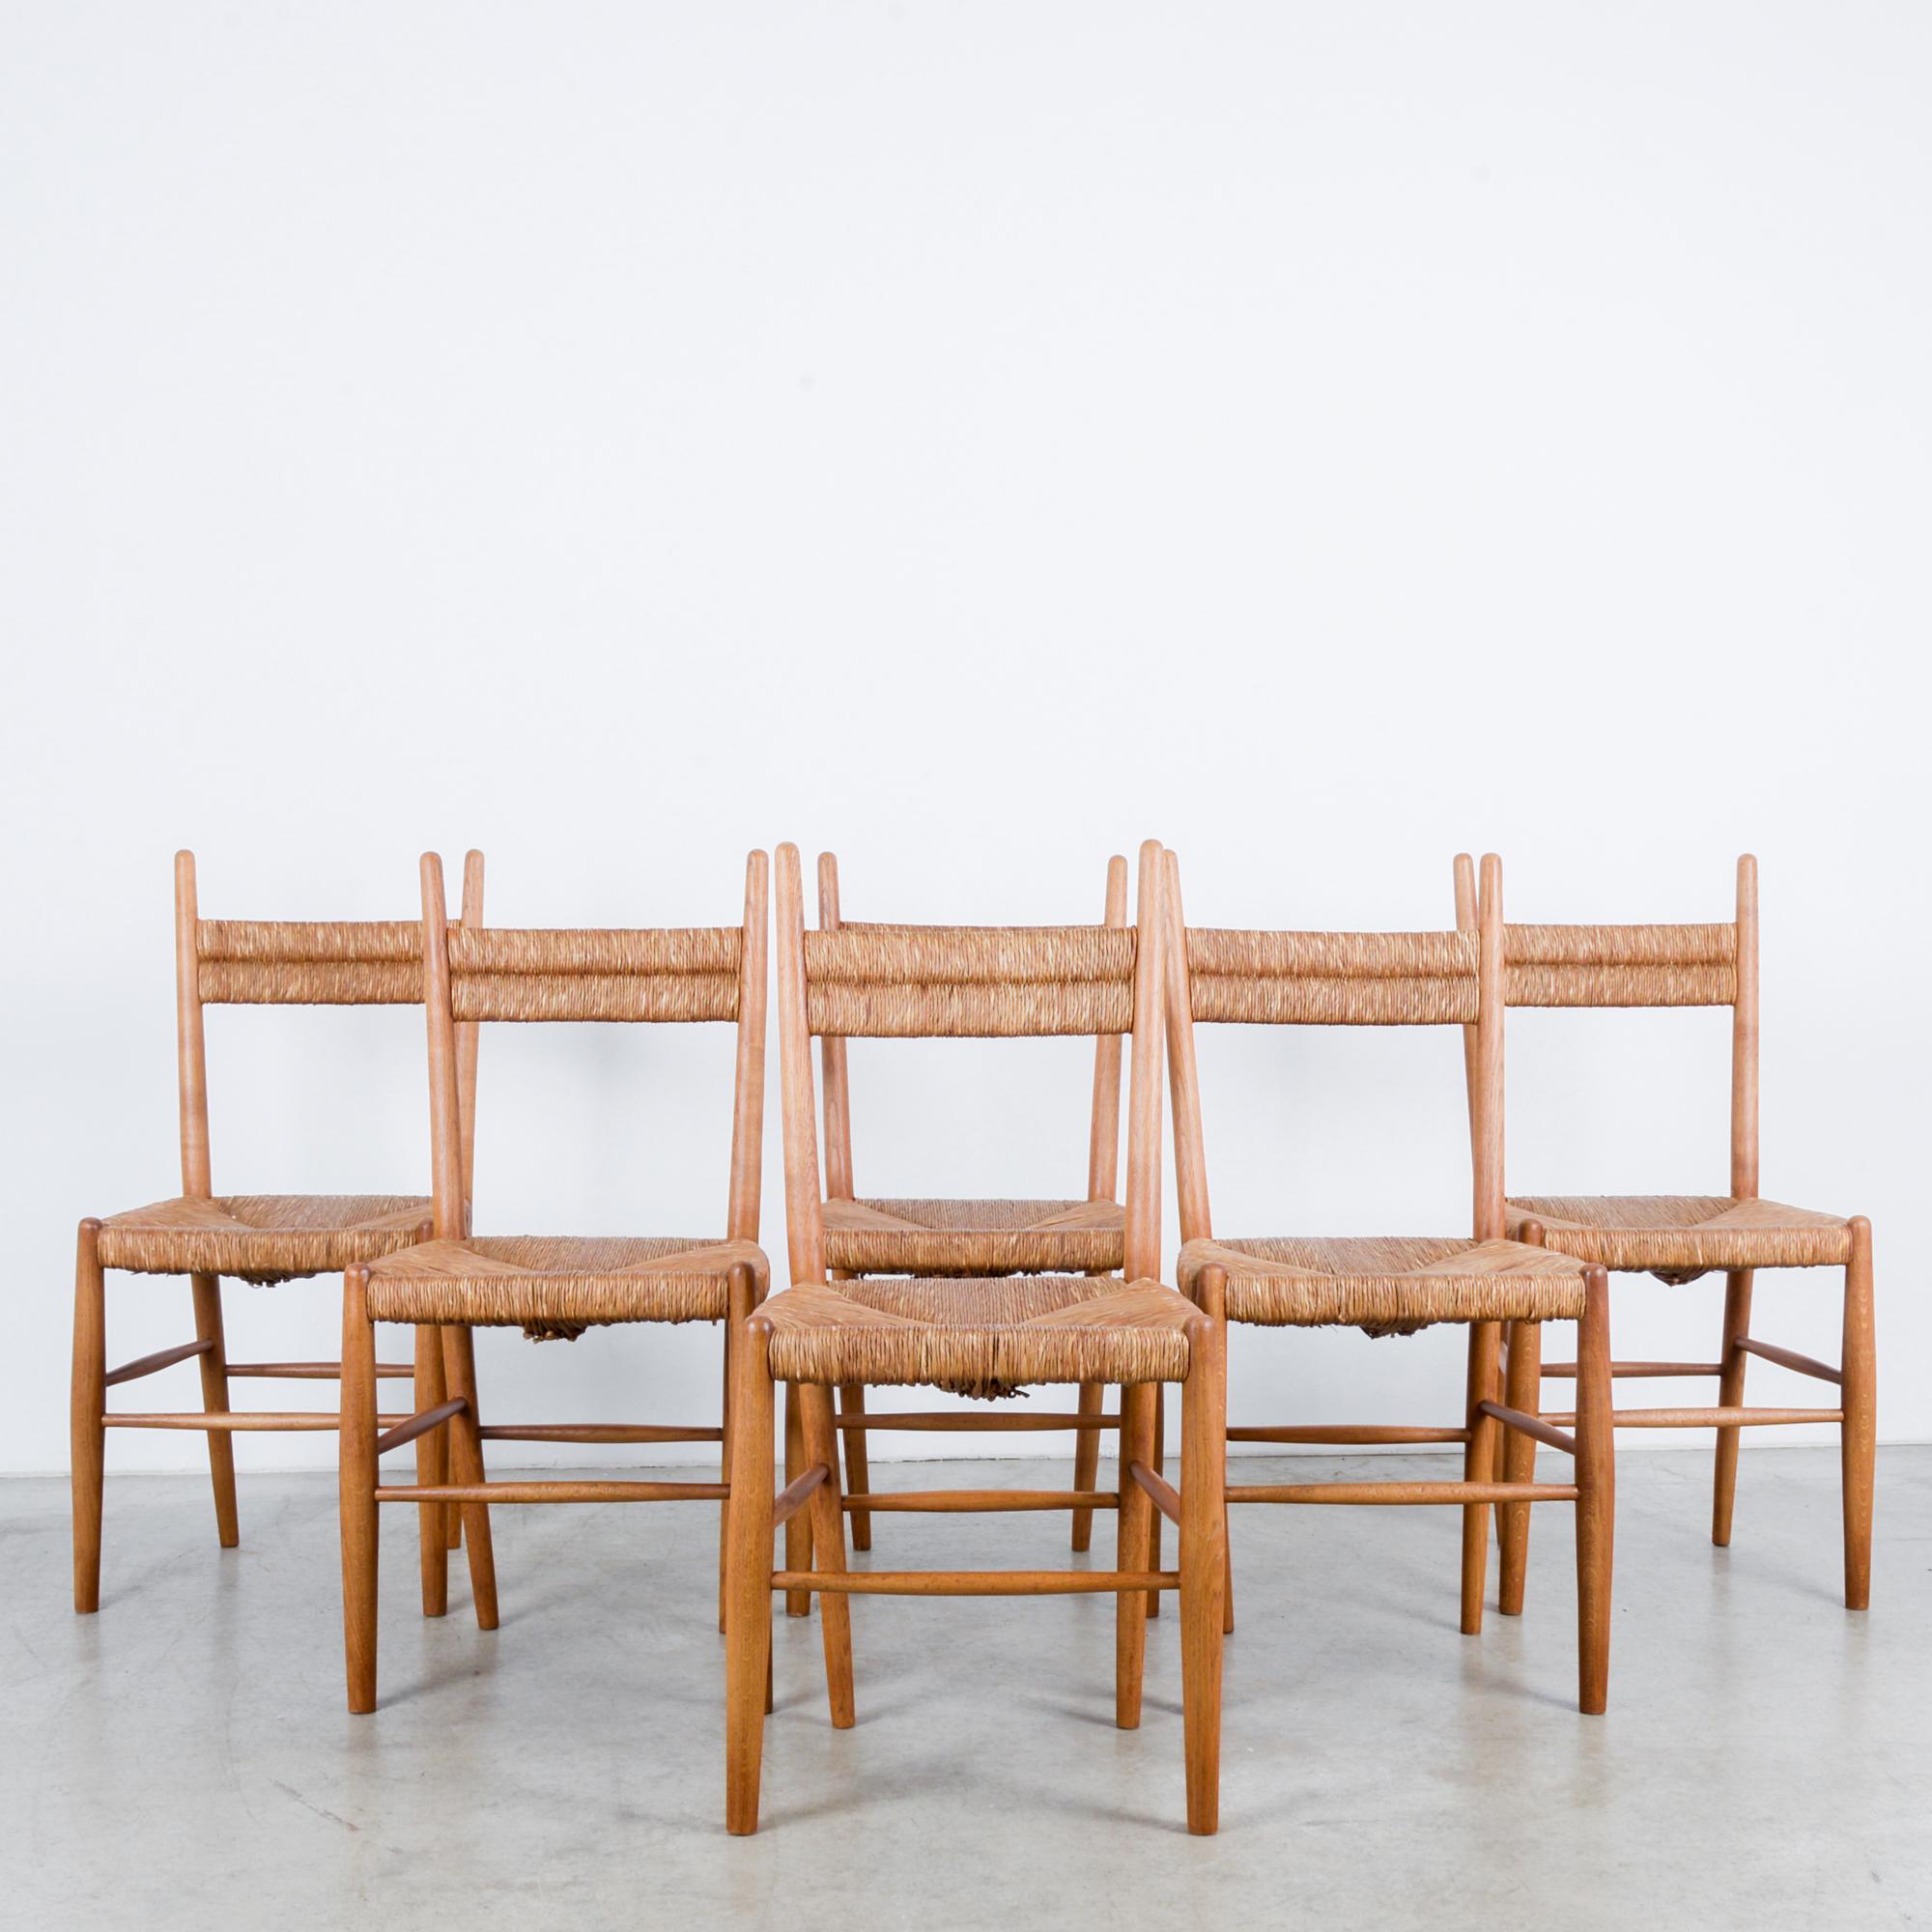 A set of six wooden chairs with woven rush seats and backs from France, circa 1960. Softly rounded barrel legs connected by simple offset stretchers form smooth, clean lines designed to support the body naturally. Combination of natural fiber and